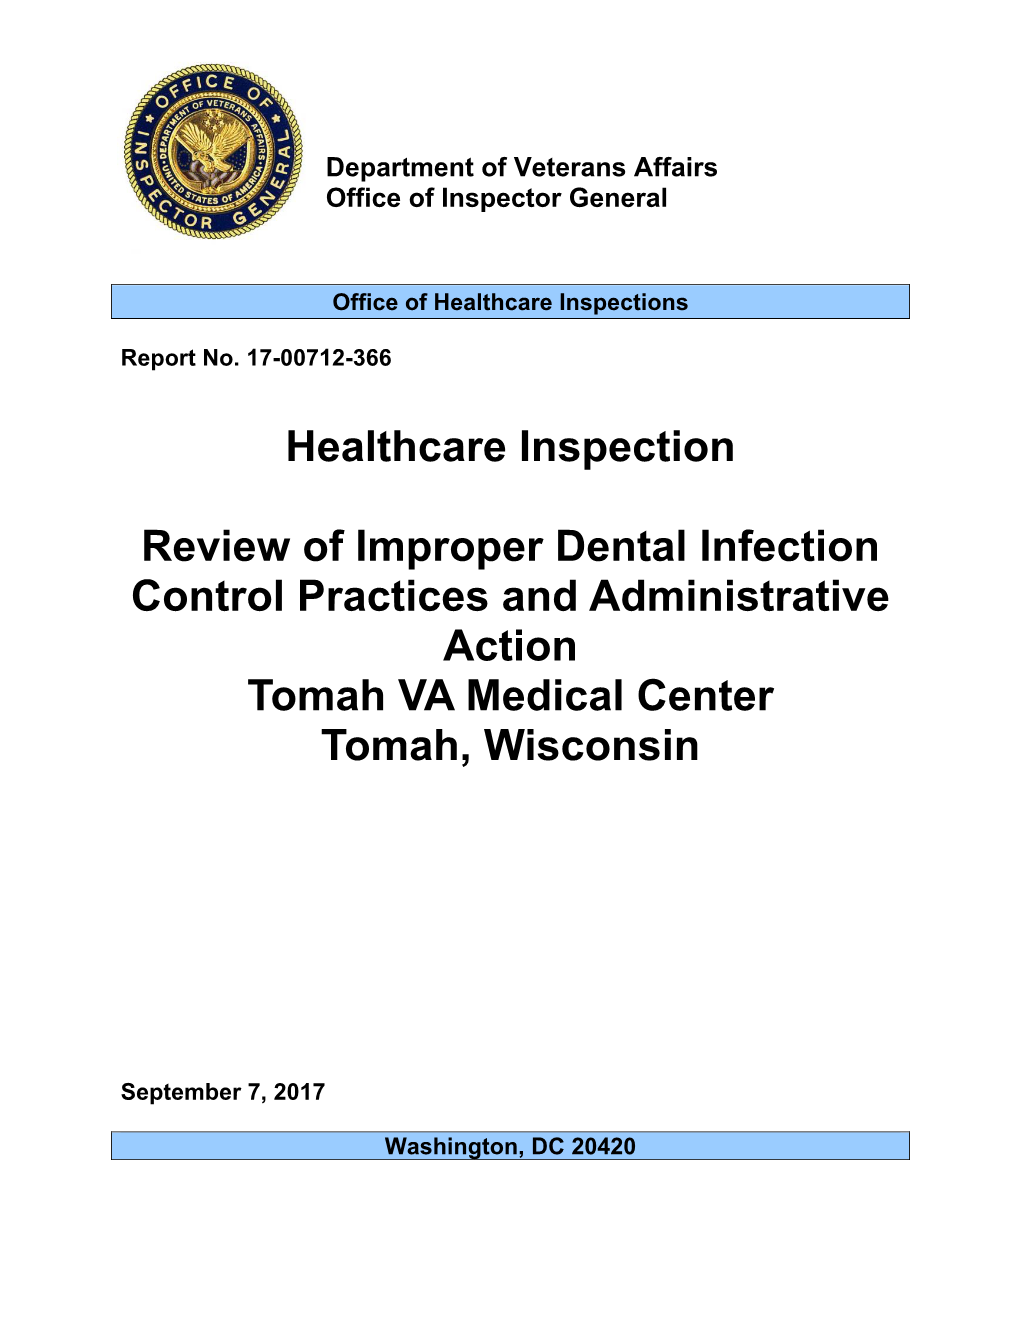 Healthcare Inspection—Review of Improper Dental Infection Control Practices and Administrative Action, Tomah VA Medical Center, Tomah, Wisconsin